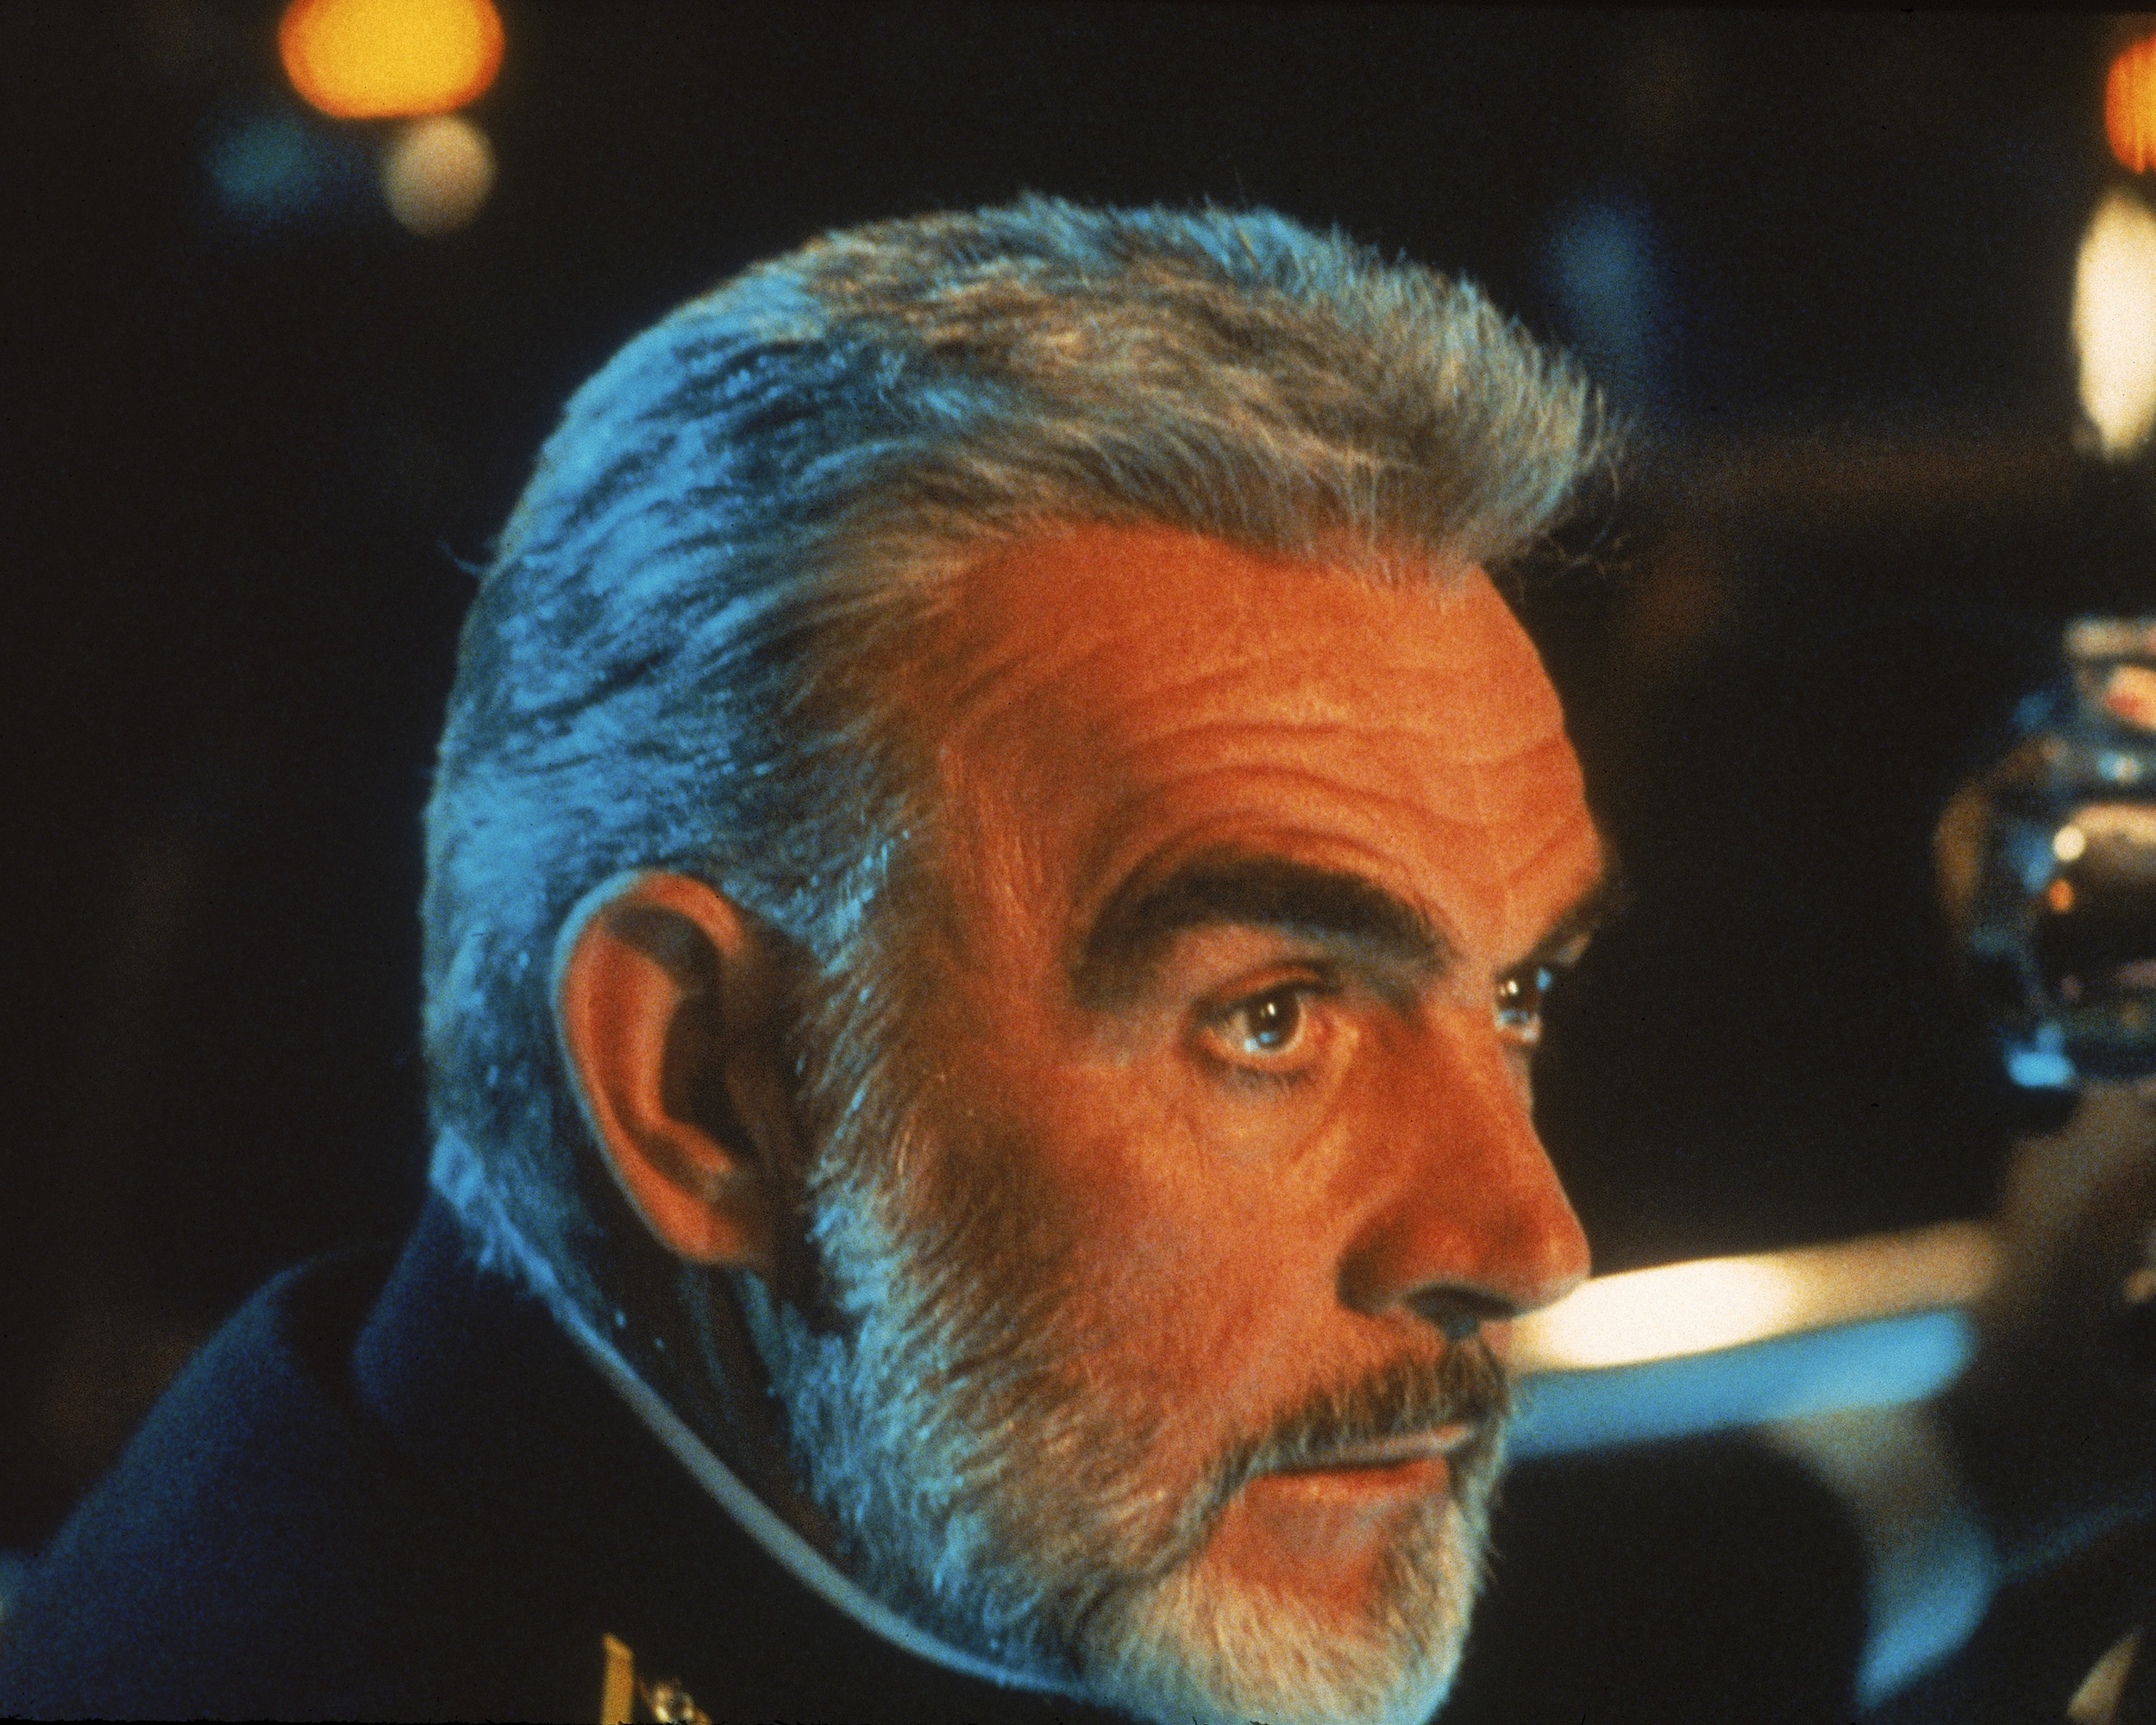 <p><em>The Hunt for Red October </em>is credited to Larry Ferguson and Donald E. Stewart. They weren’t the only writers on the film, though. John Milius, who had worked on war films like <em>Apocalypse Now</em> and <em>Red Dawn</em>, was brought in to write some speeches for Connery and some scenes for the Russian characters.</p><p><a href='https://www.msn.com/en-us/community/channel/vid-cj9pqbr0vn9in2b6ddcd8sfgpfq6x6utp44fssrv6mc2gtybw0us'>Follow us on MSN to see more of our exclusive entertainment content.</a></p>